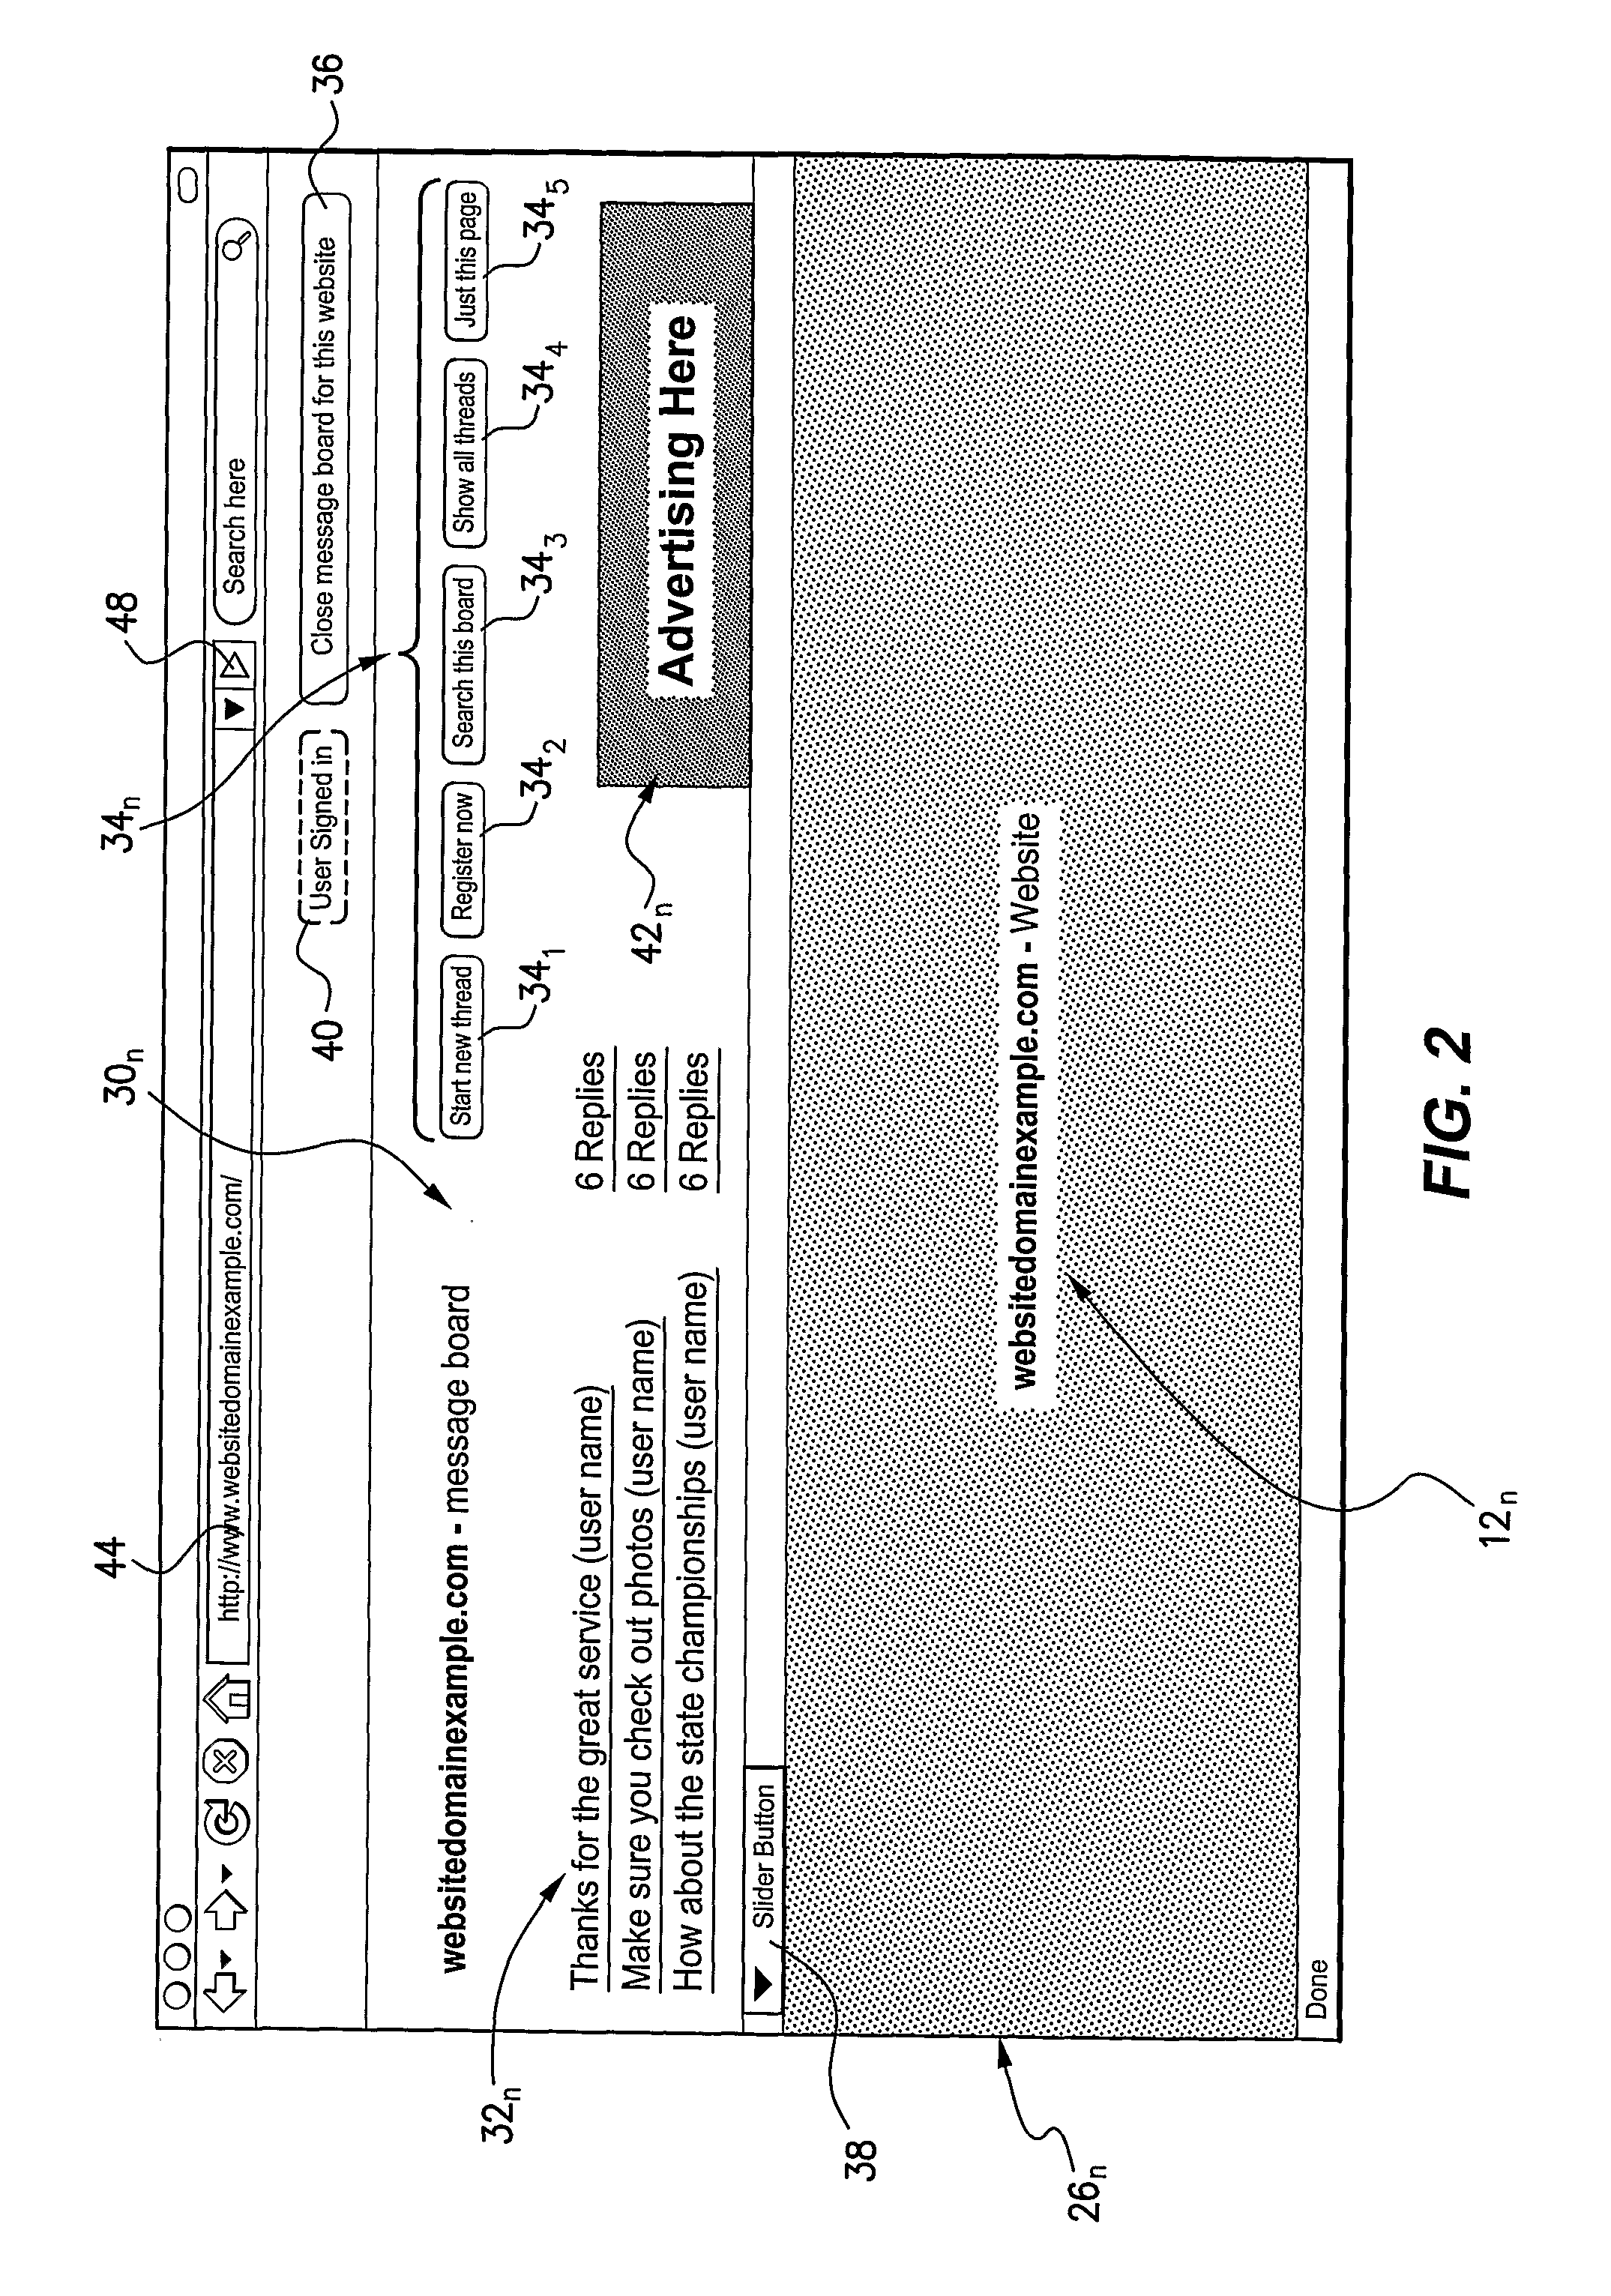 System and Method for Evaluating Network Content